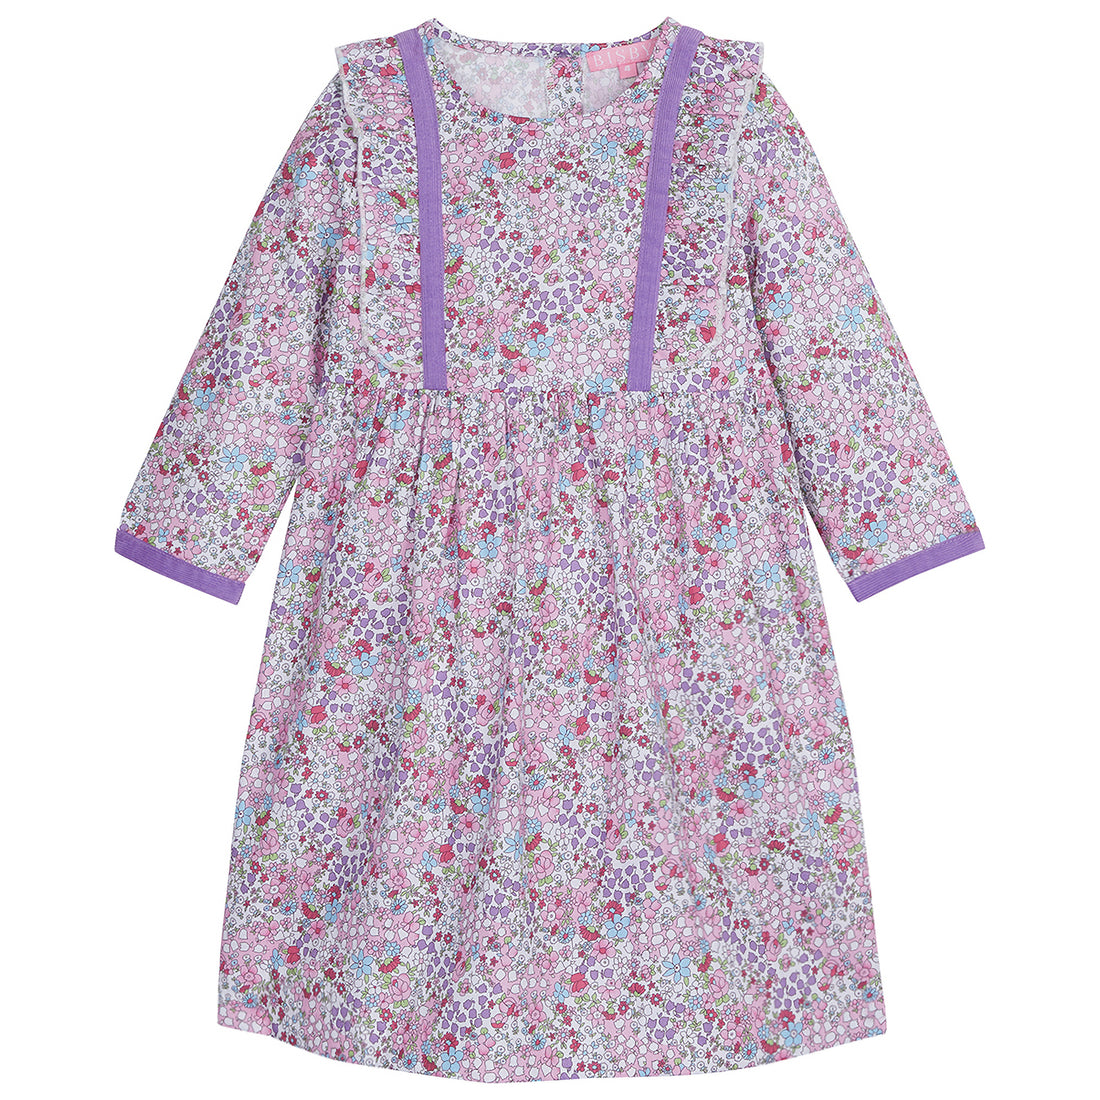 Dress with mainly purple and pink floral pattern, has ruffles around bust area and purple trim around the cuffs of dress--PortoDress for girls BISBY